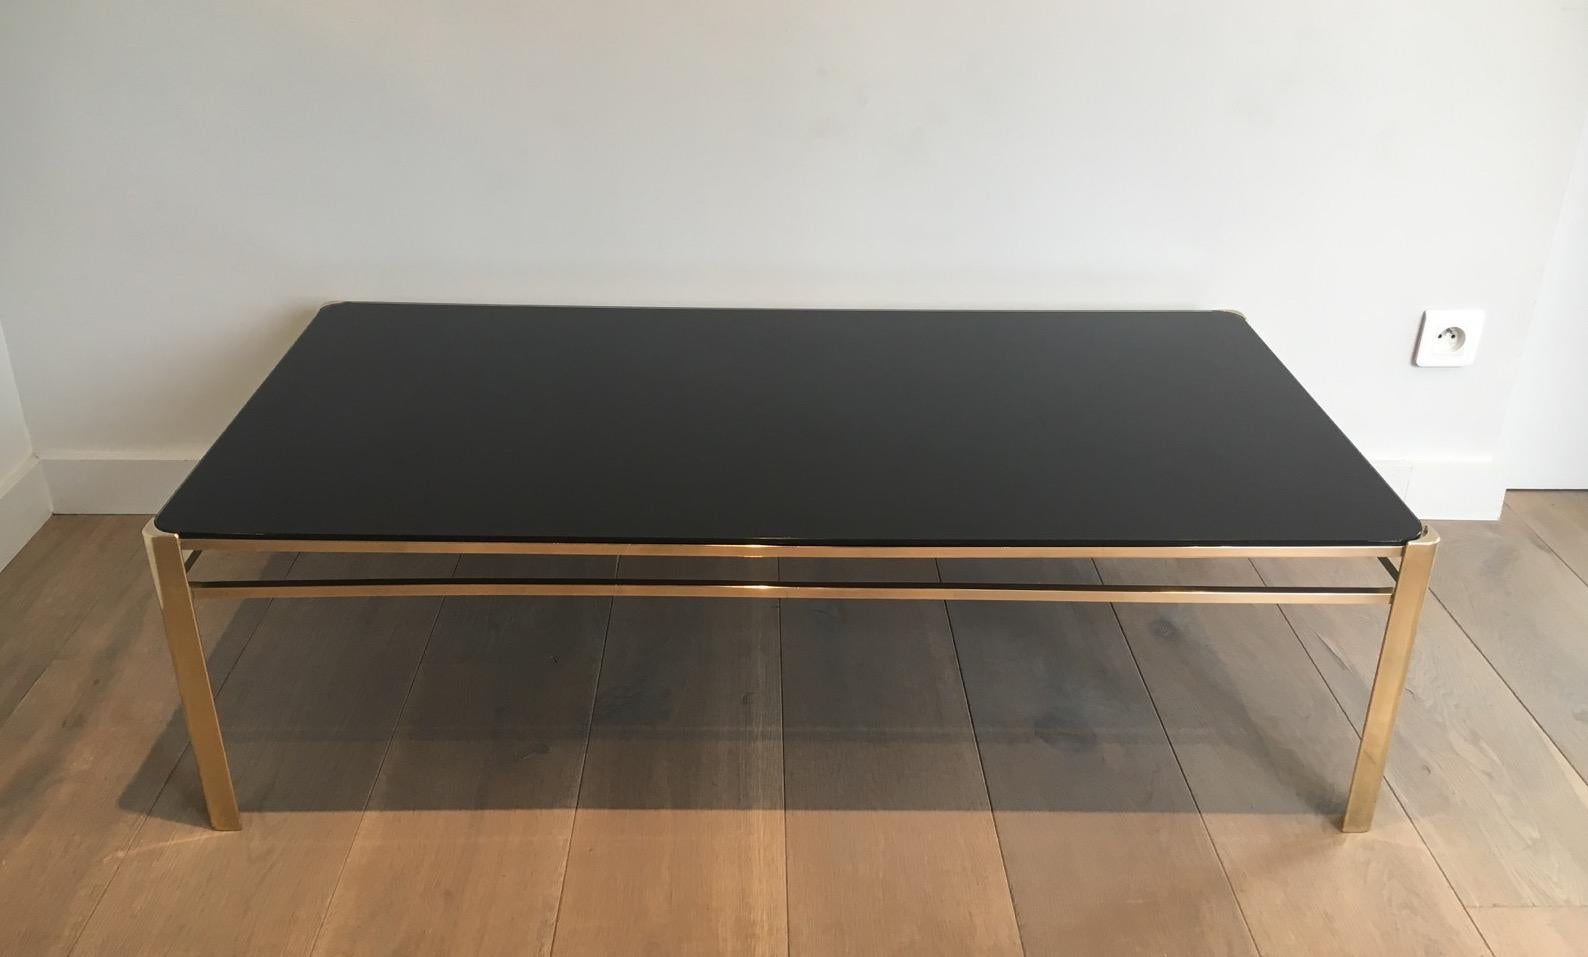 This very nice coffee table is made of bronze with a black lacquered glass top. This is a model attributed to famous french designer Jacques Quinet, circa 1970. The table is signed and numbered.